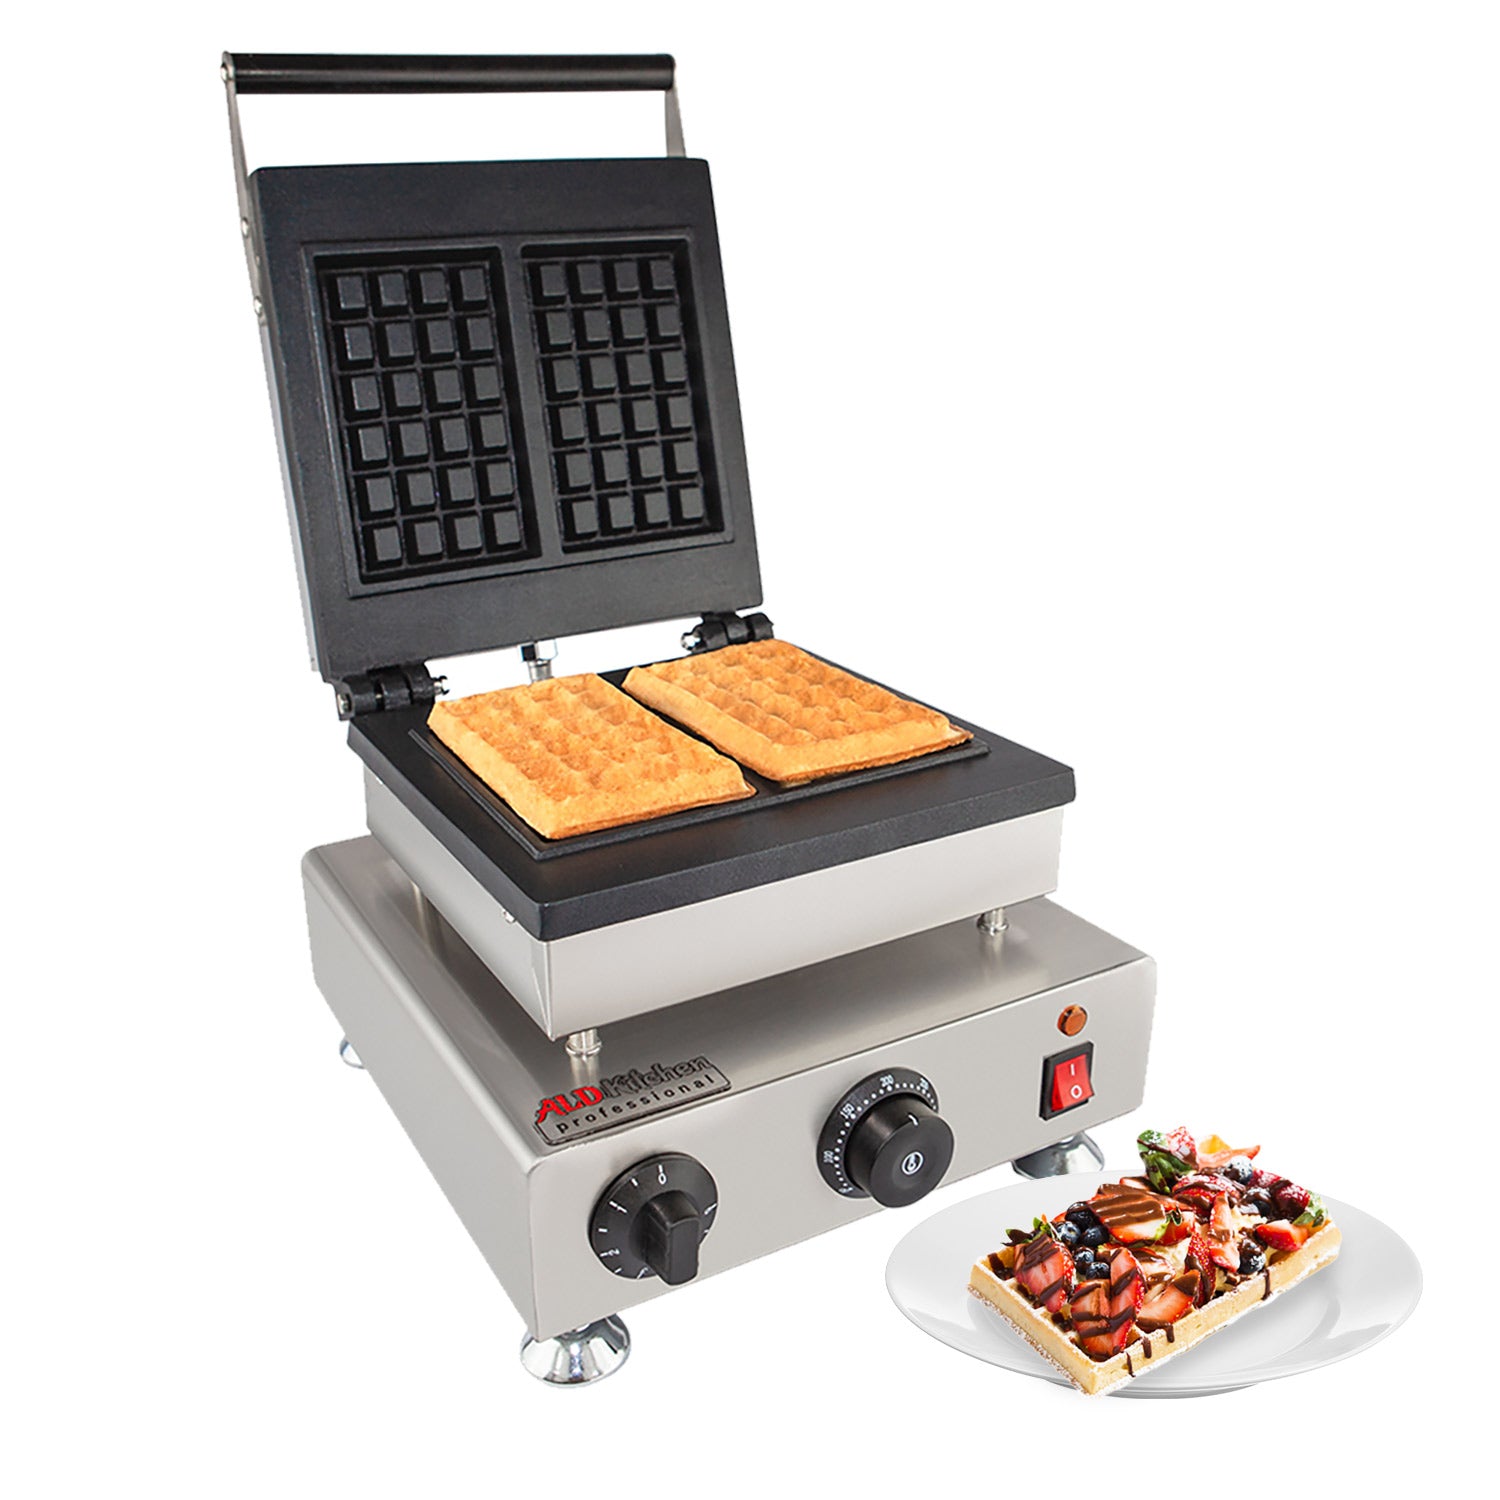 ALDKitchen Belgian Waffle Iron | Press Type | 2 Square Waffles | Business Use | Stainless Steel | 110V